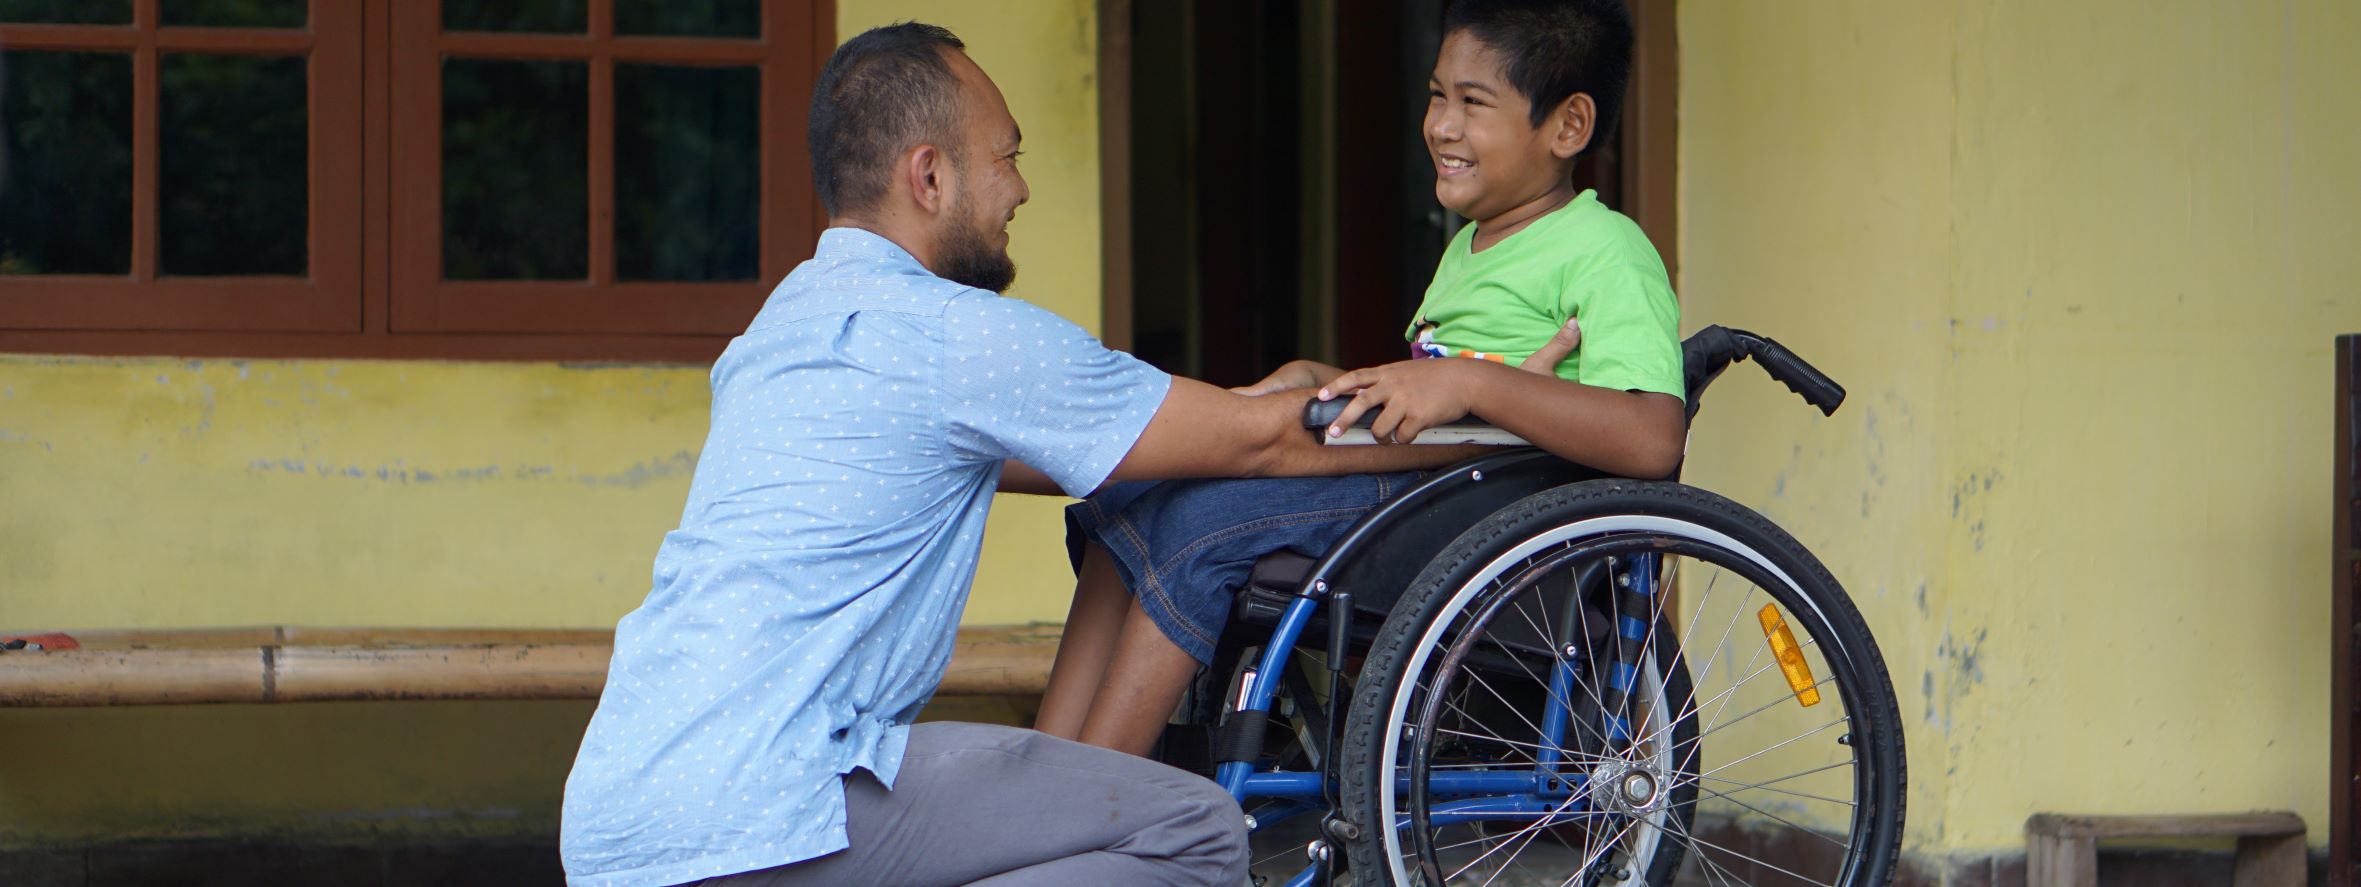 Improving access to assistive technologies in LMICs